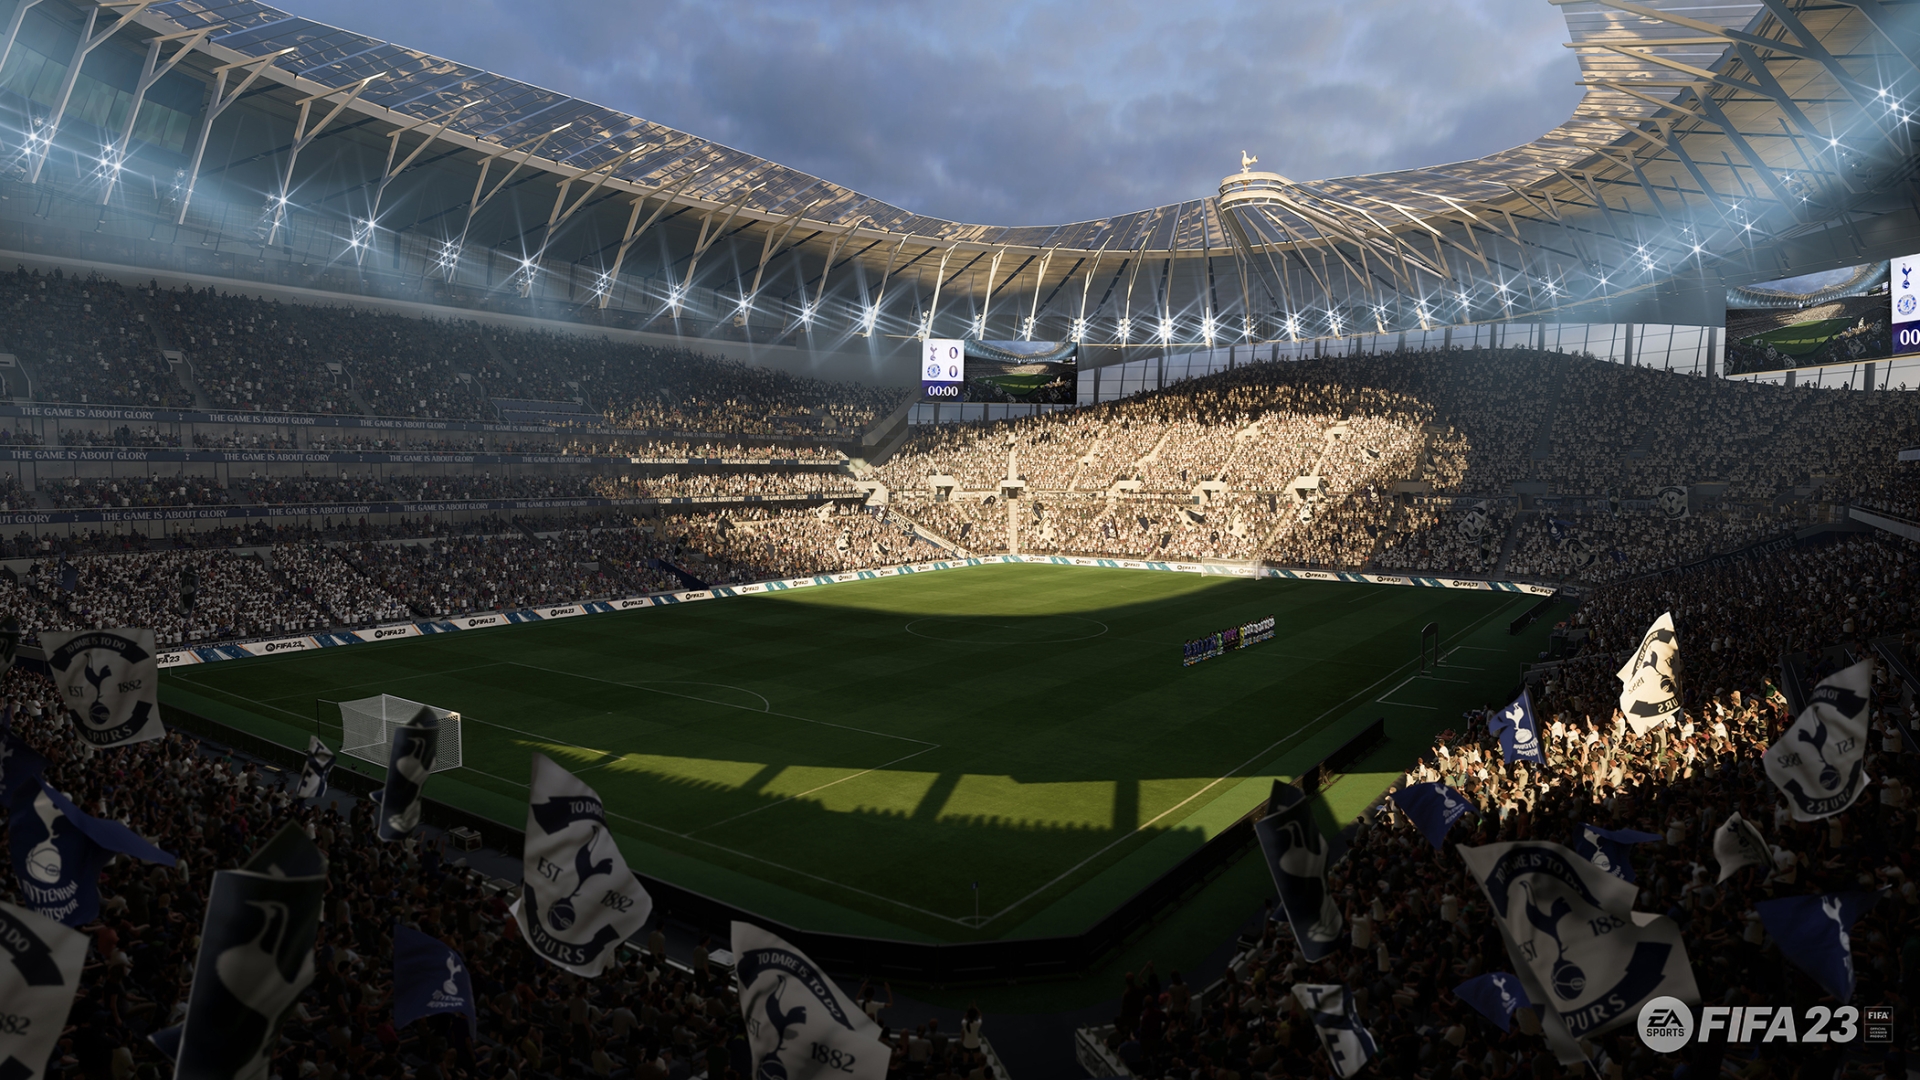 FIFA 23 release date announced with first look trailer